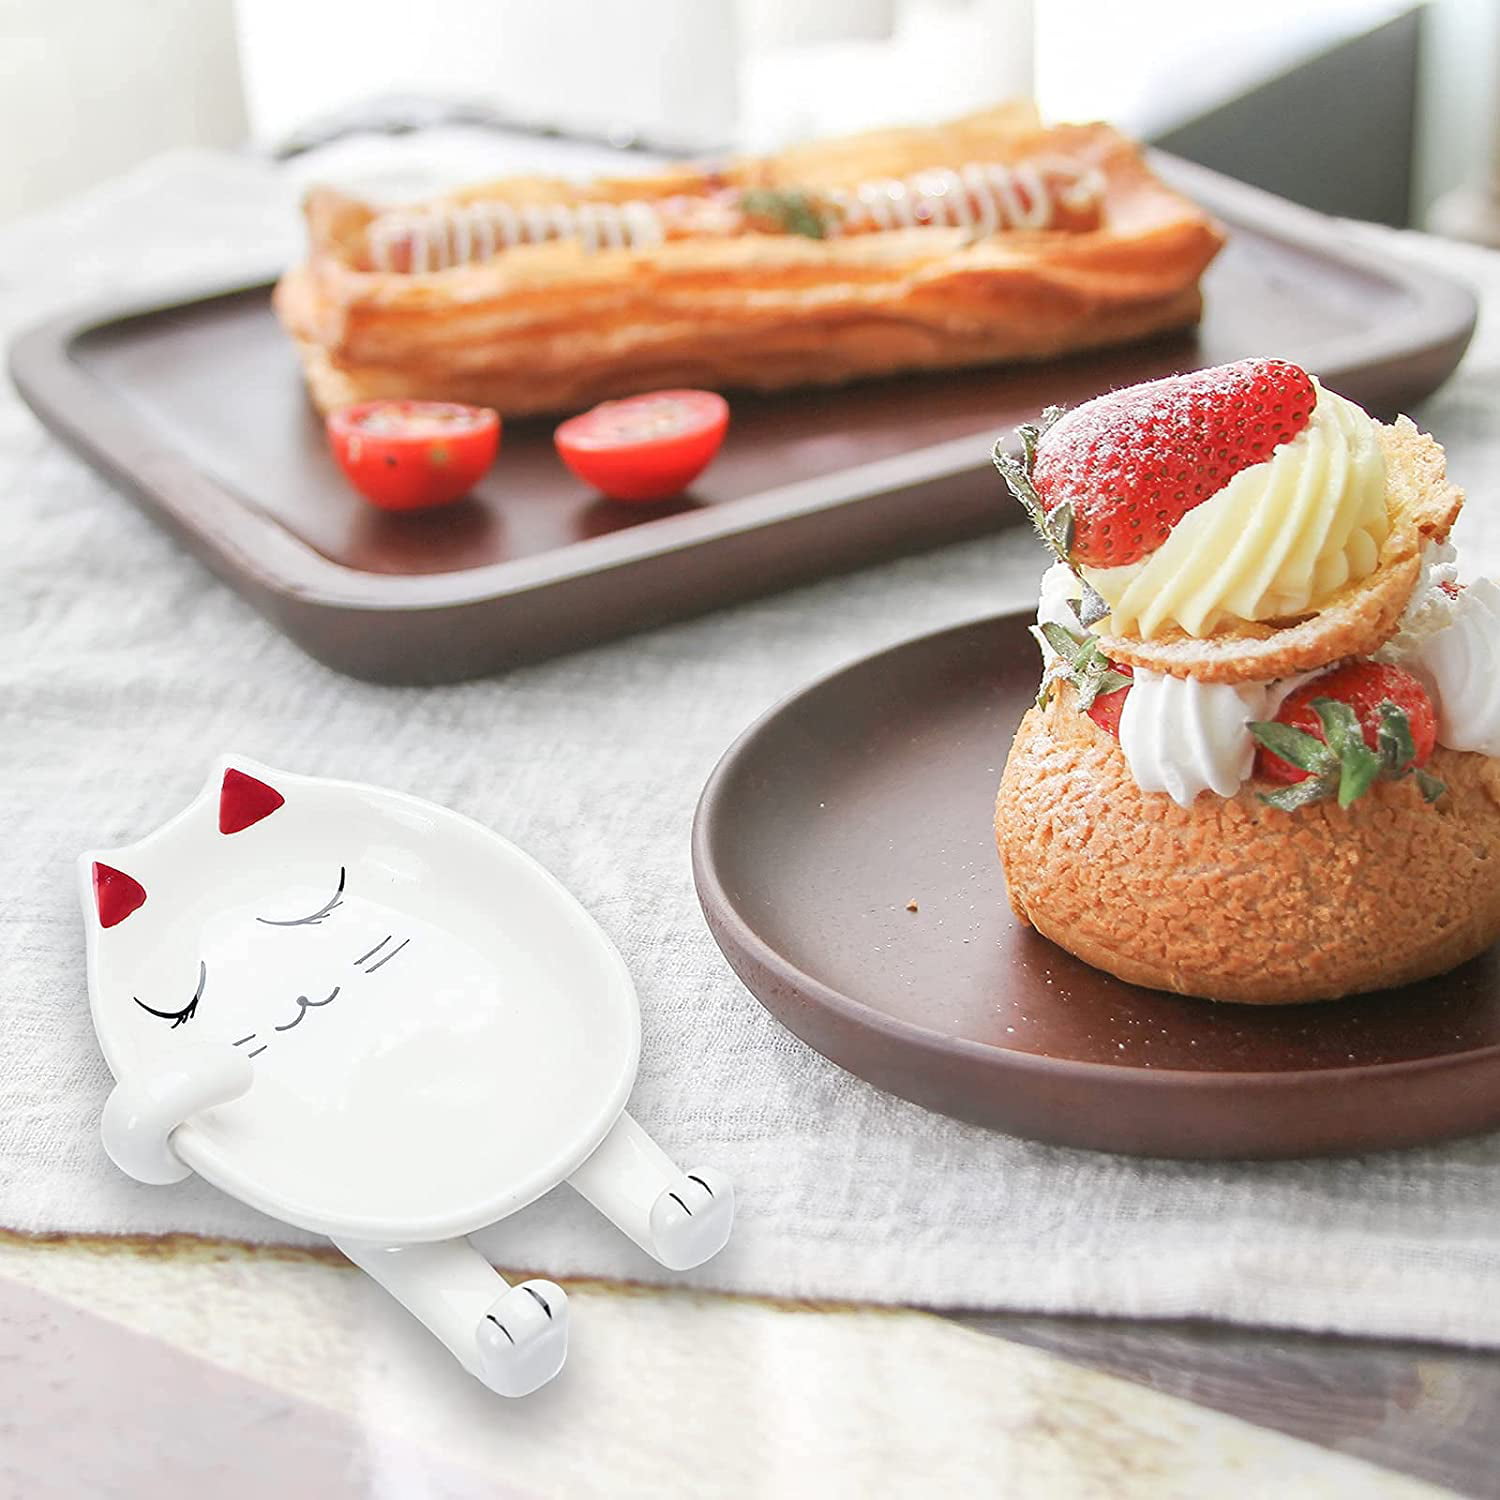 Dropship 1pc Cat Spoon Rest; Ceramic Cute Spoon Holder Rest For Stove Top;  Cat Kitchen Accessories; Stove Holder Utensil Spoon Rest For Kitchen  Counter to Sell Online at a Lower Price